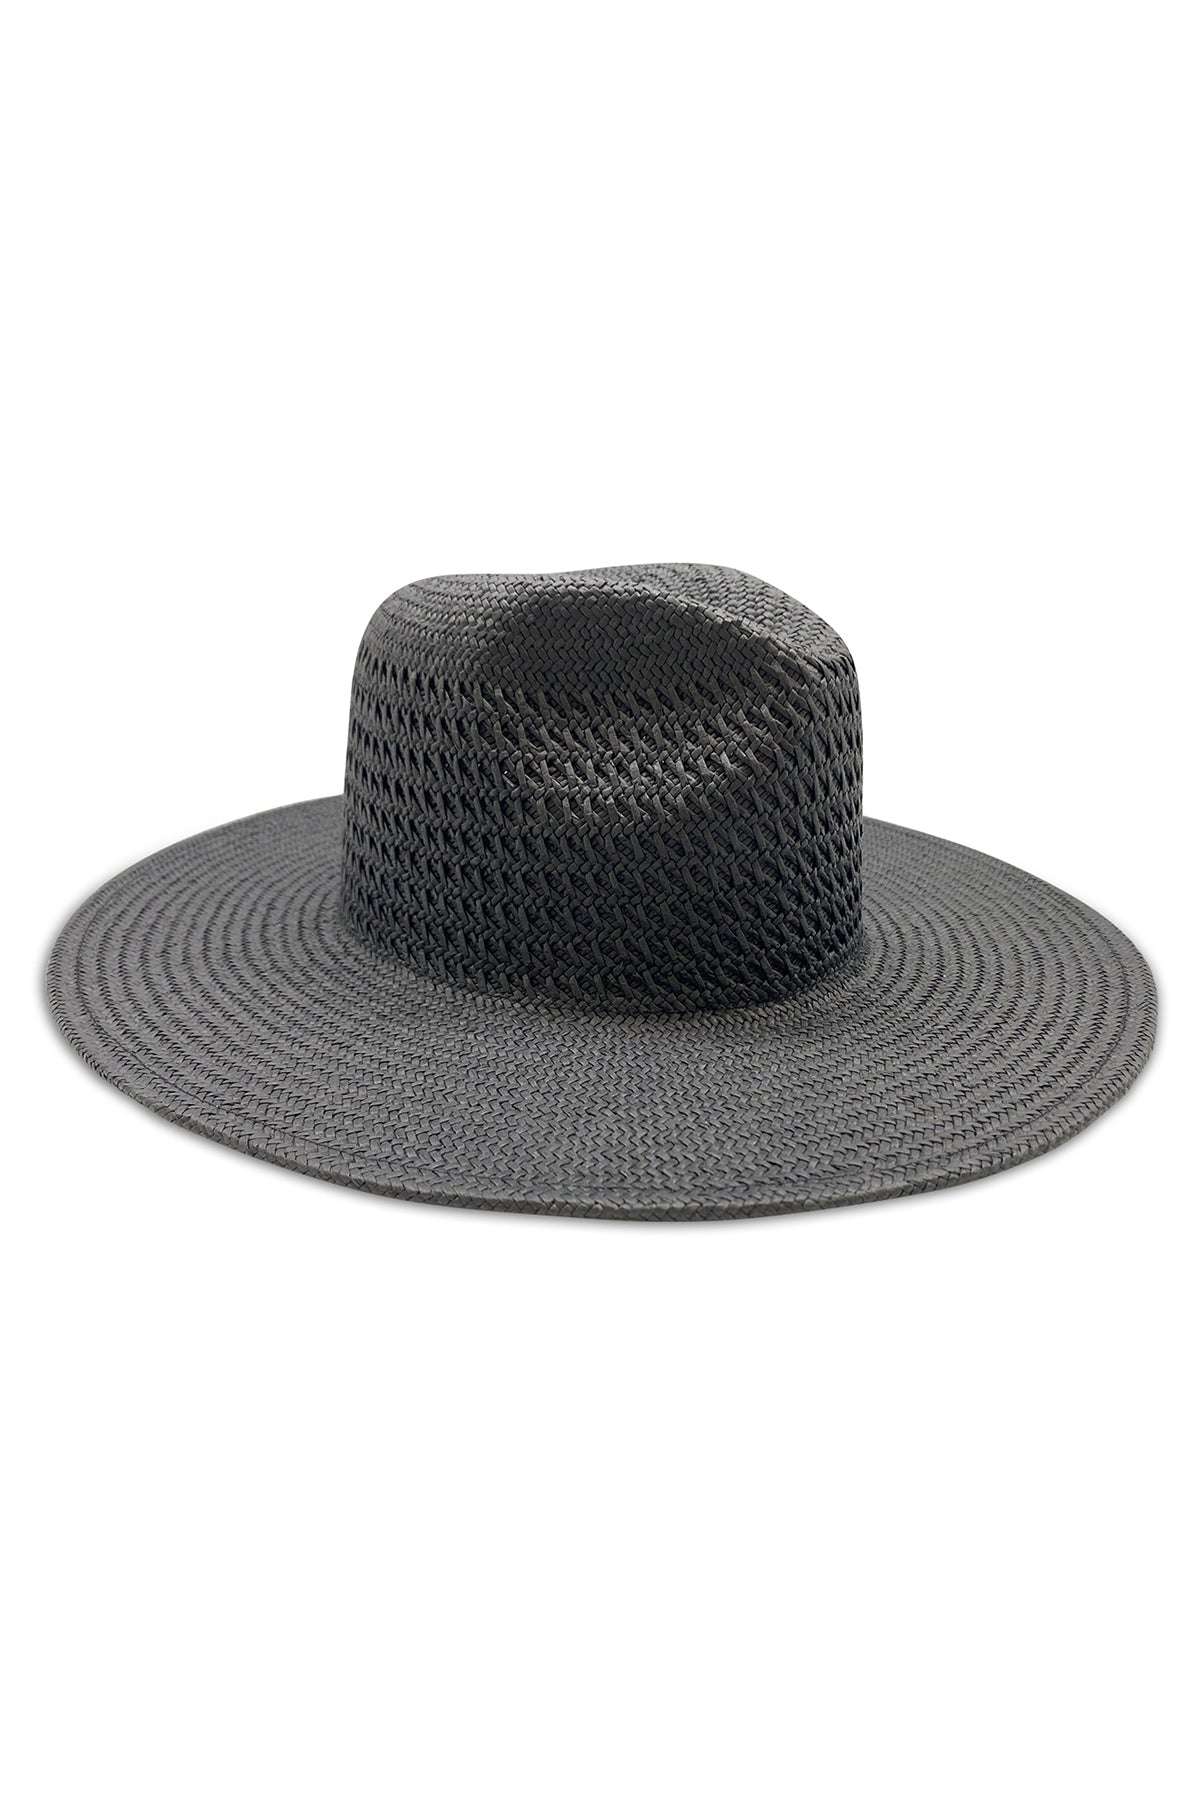   Vented Luxe Packable Hat Black 